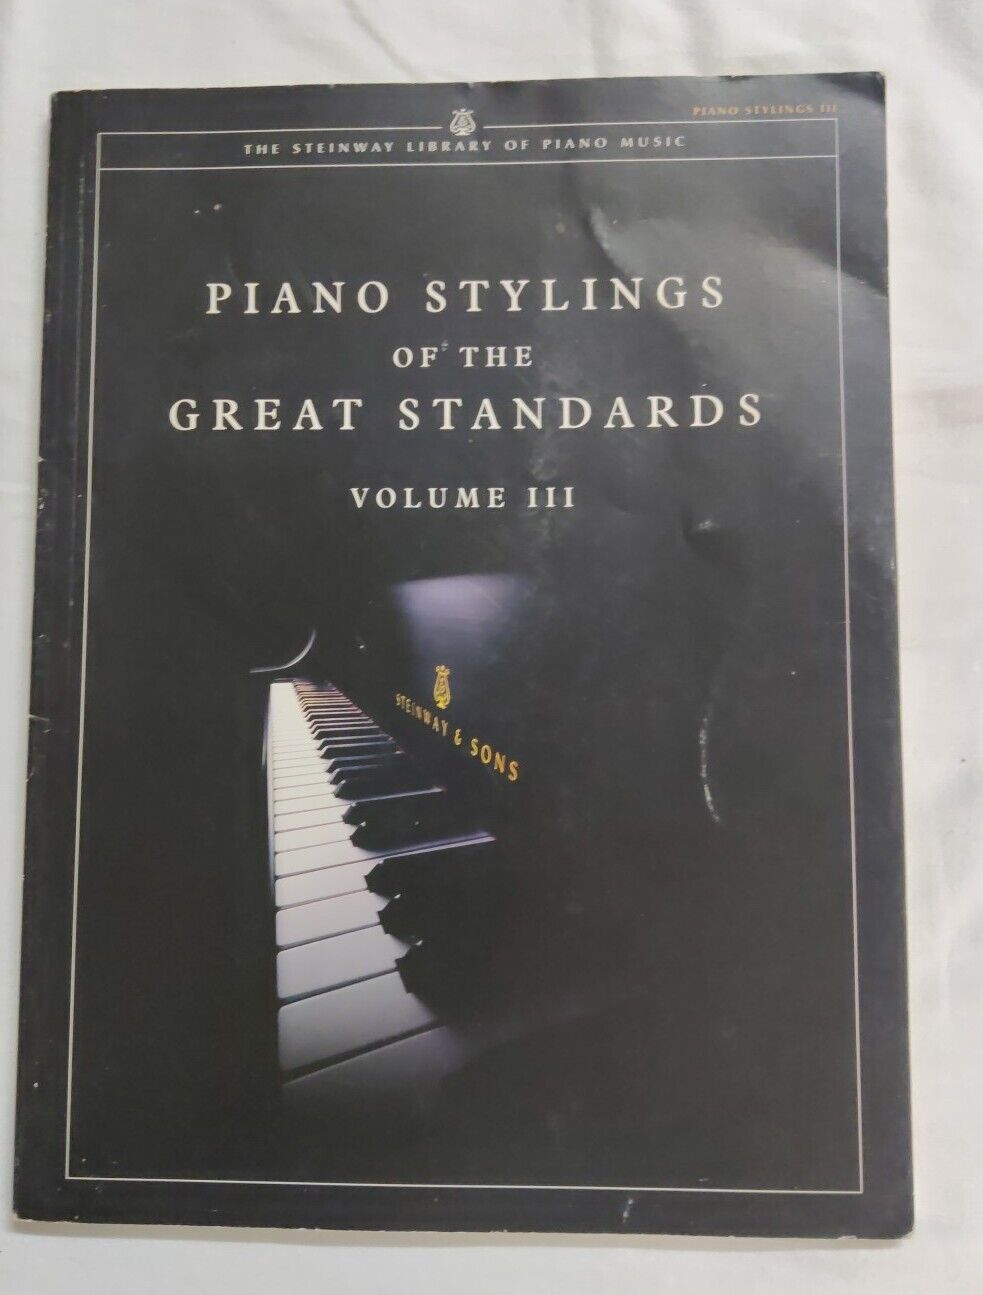 Piano Stylings of the Great Standards: Volume III The Steinway Library of Piano